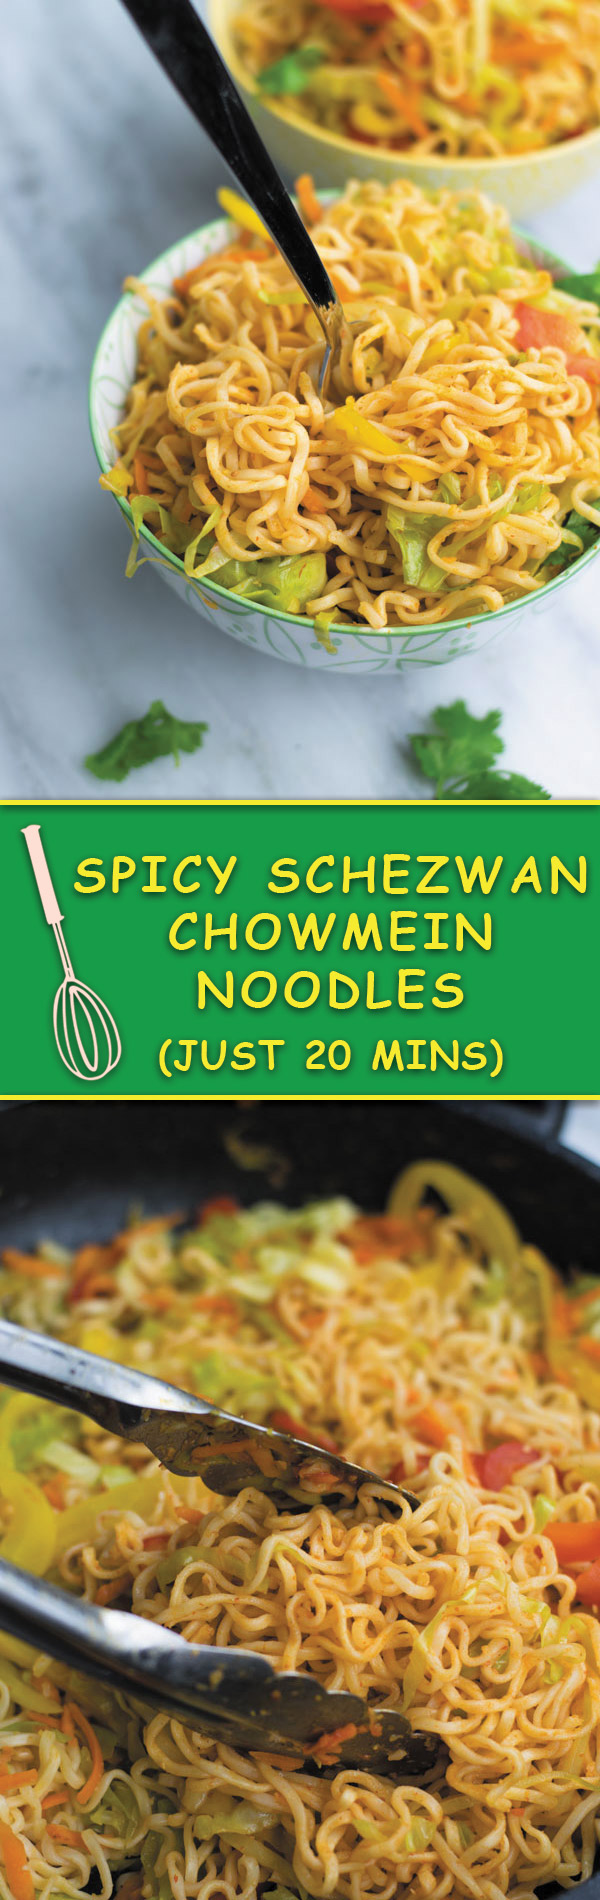 Spicy Schezwan Chowmein Noodles - cheap ramen noodles used without seasoning packets, with tons of fresh vegetables and spicy schezwan sauce. A quick 20 MINS dinner that keeps U & Your wallet full!